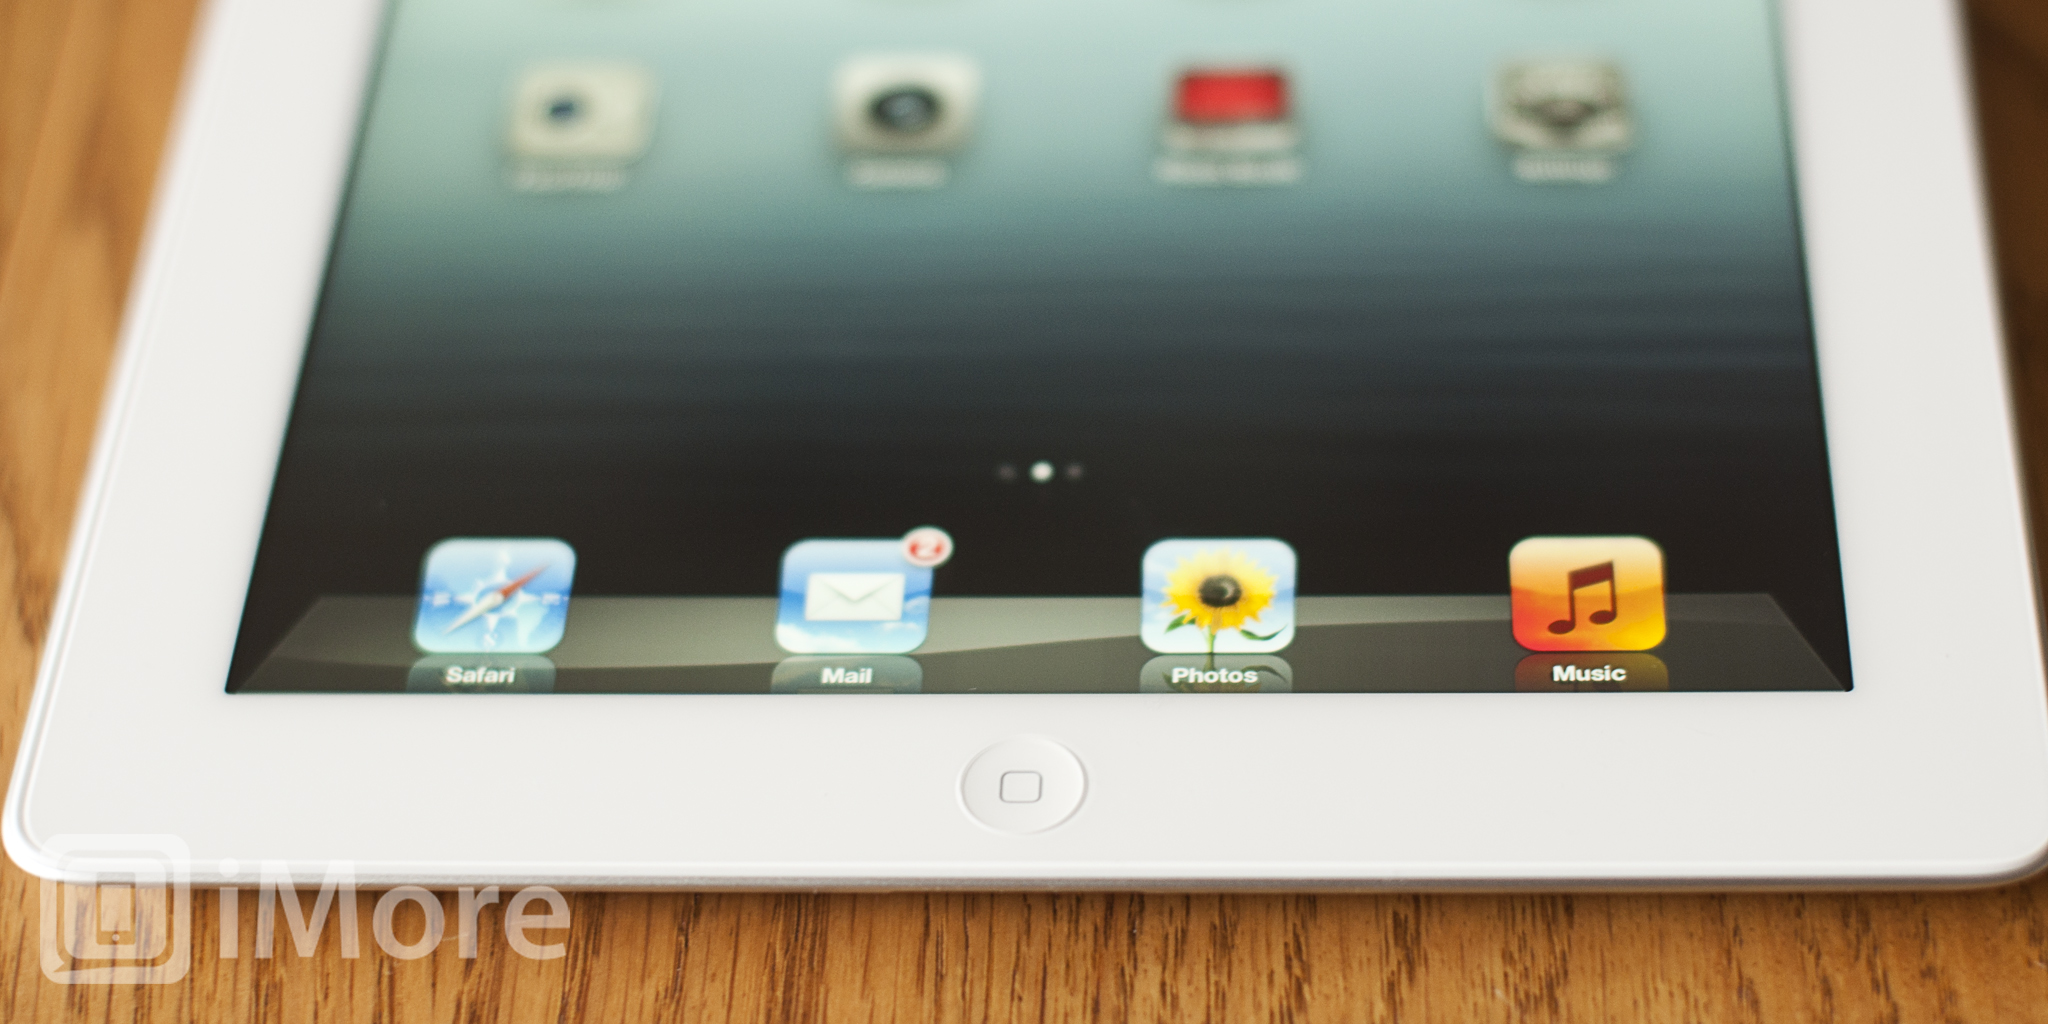 How to use Home button on the new iPad 